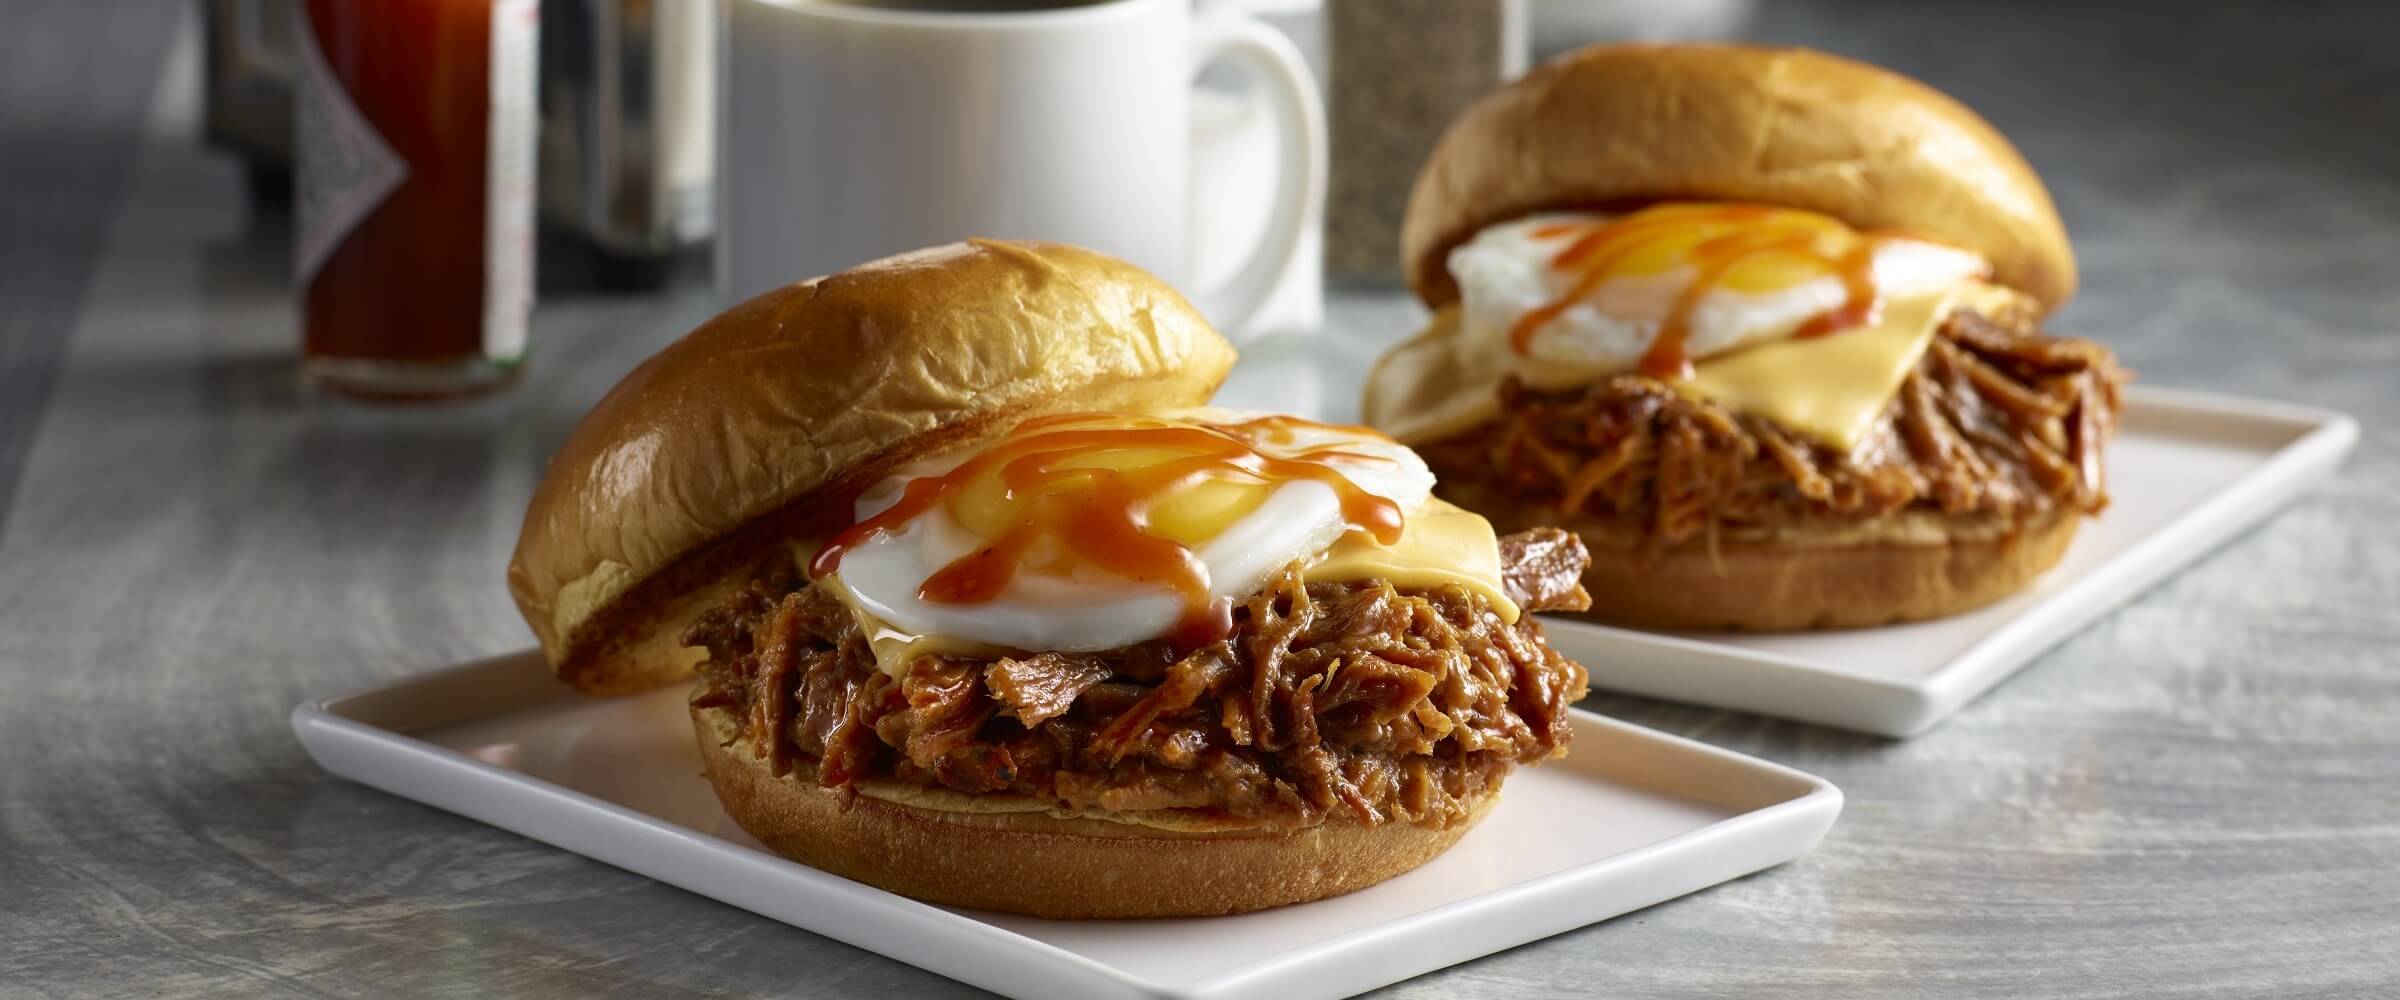 Pulled pork fried egg breakfast sandwich with cheese on white plates with coffee cup